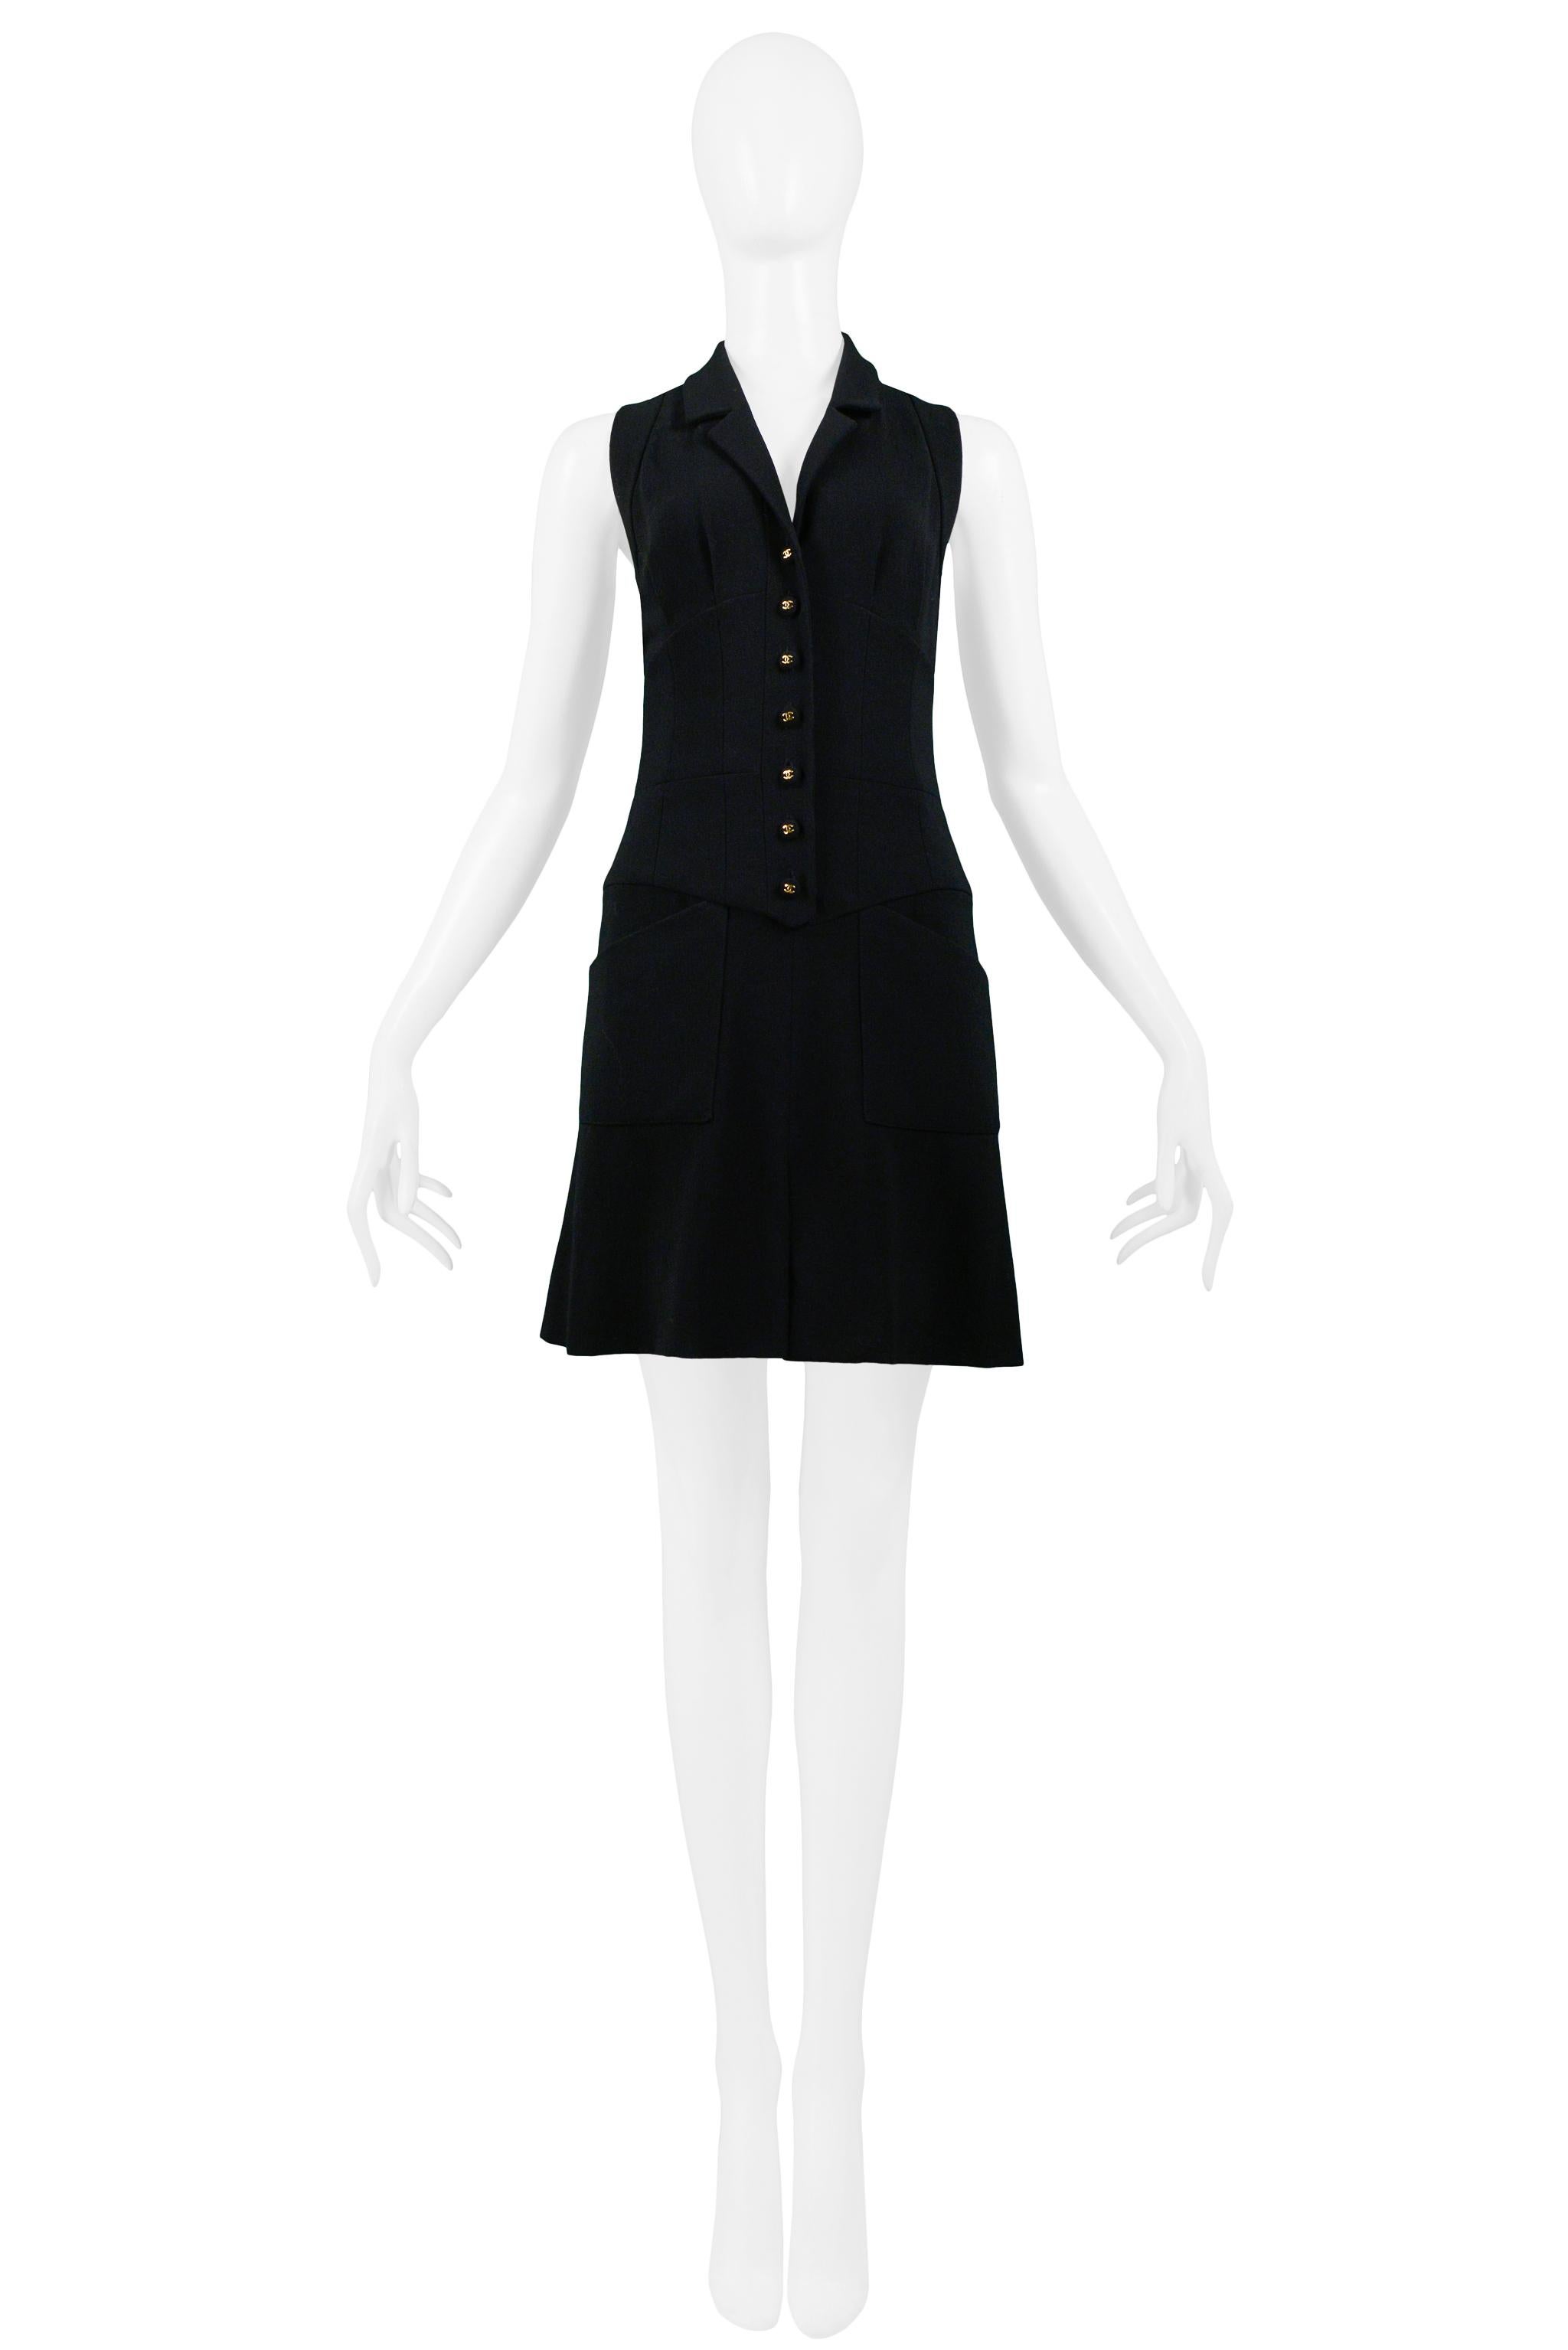 Vintage Chanel black wool button front sleeveless mini dress with Chanel logo buttons, fitted seamed waist, and angled pockets at hips. Collection 1995.

Excellent Vintage Condition.

Size 38